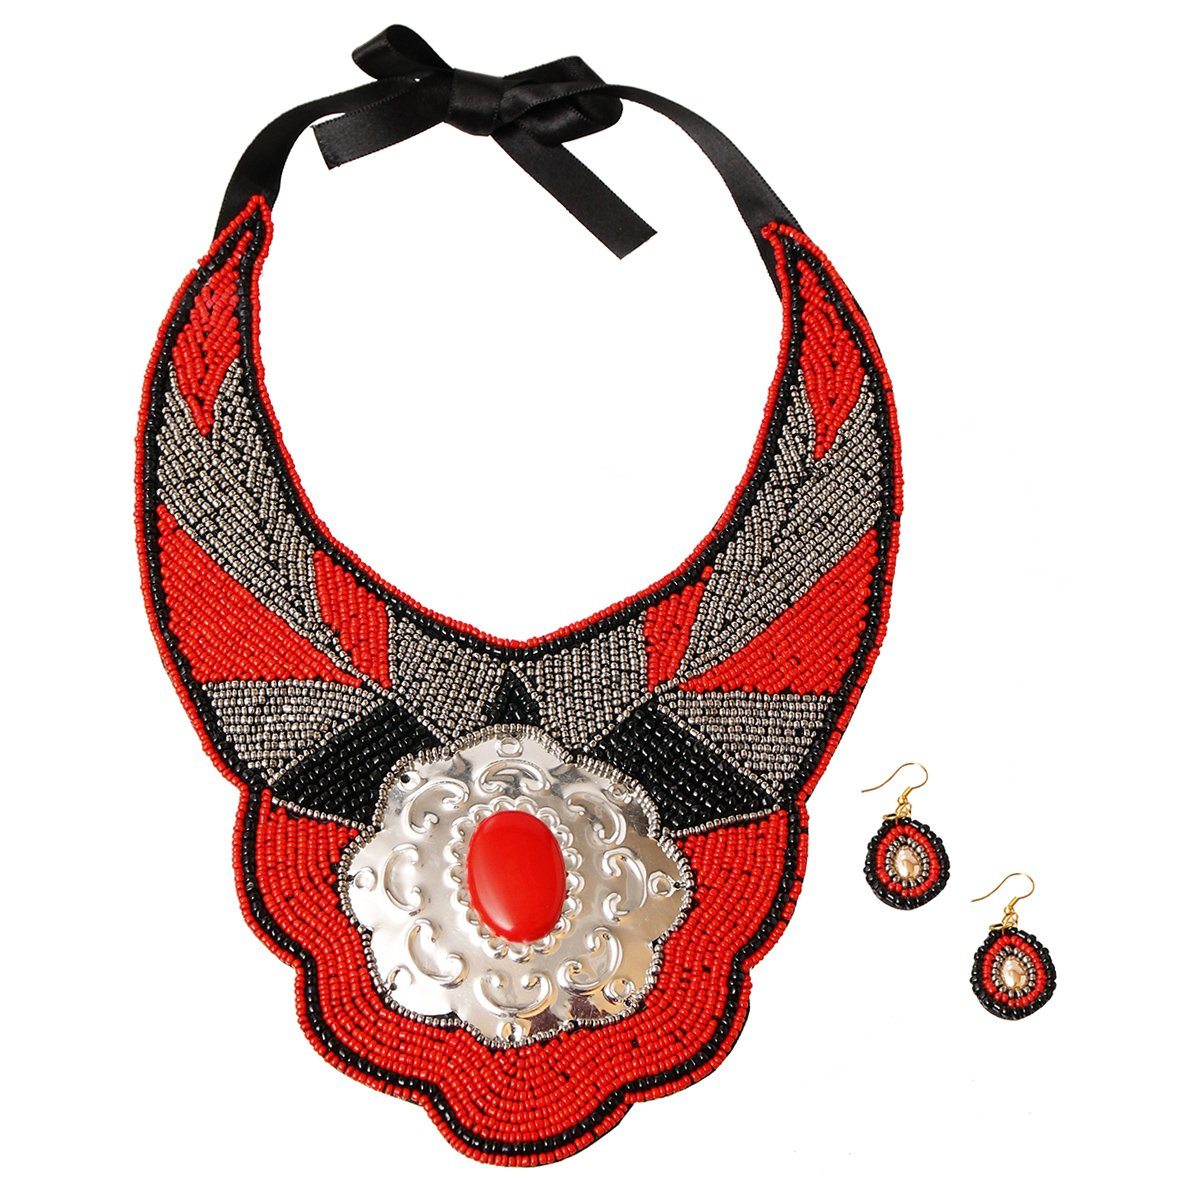 Red and Silver Beaded Bib Necklace Set Featuring Stamped Metal Plate Design